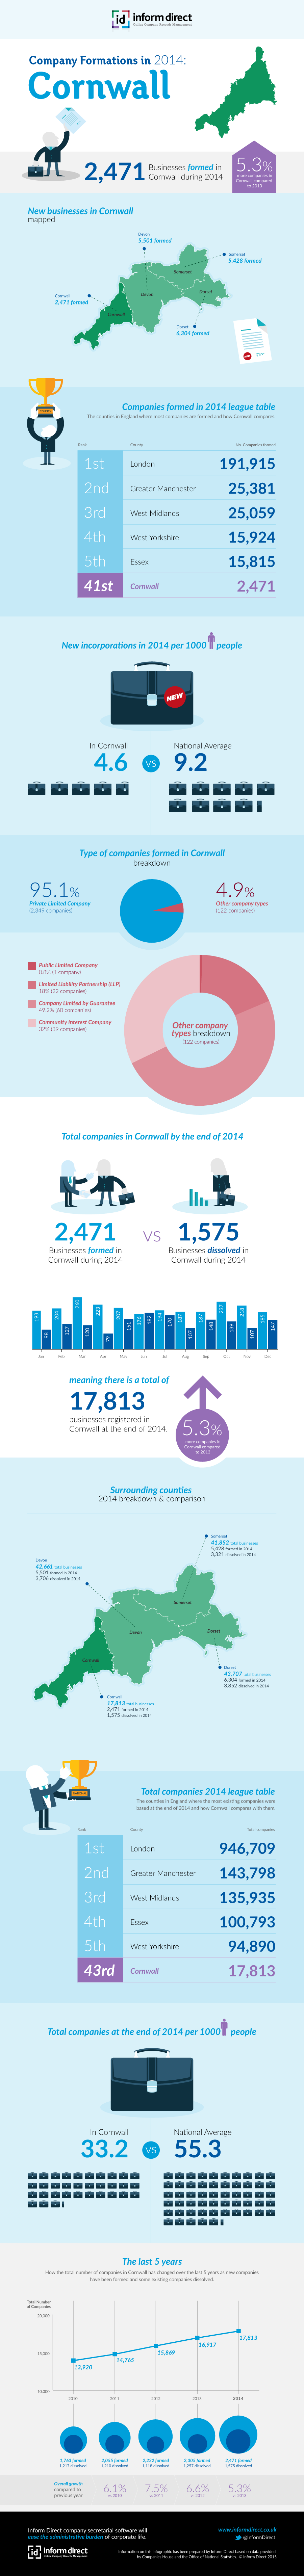 Inform Direct - Company Formations in Cornwall 2014 Infographic